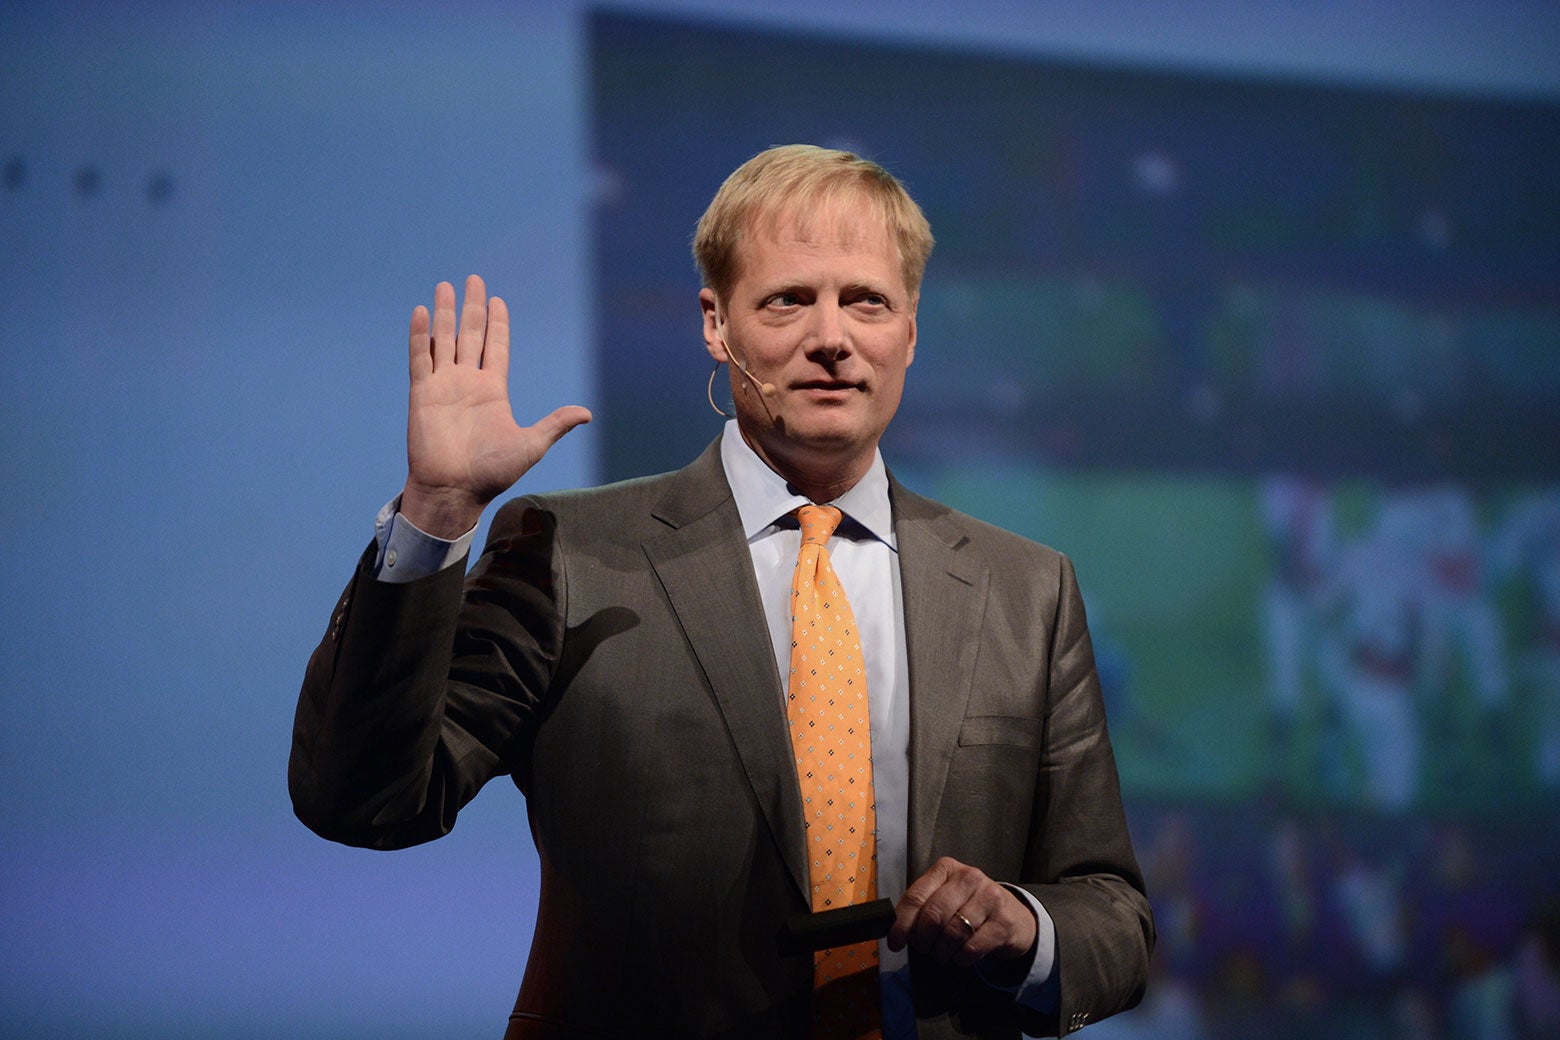 Brian Wansink raises a hand during the 2013 Discovery Vitality Summit in Johannesburg, South Africa.